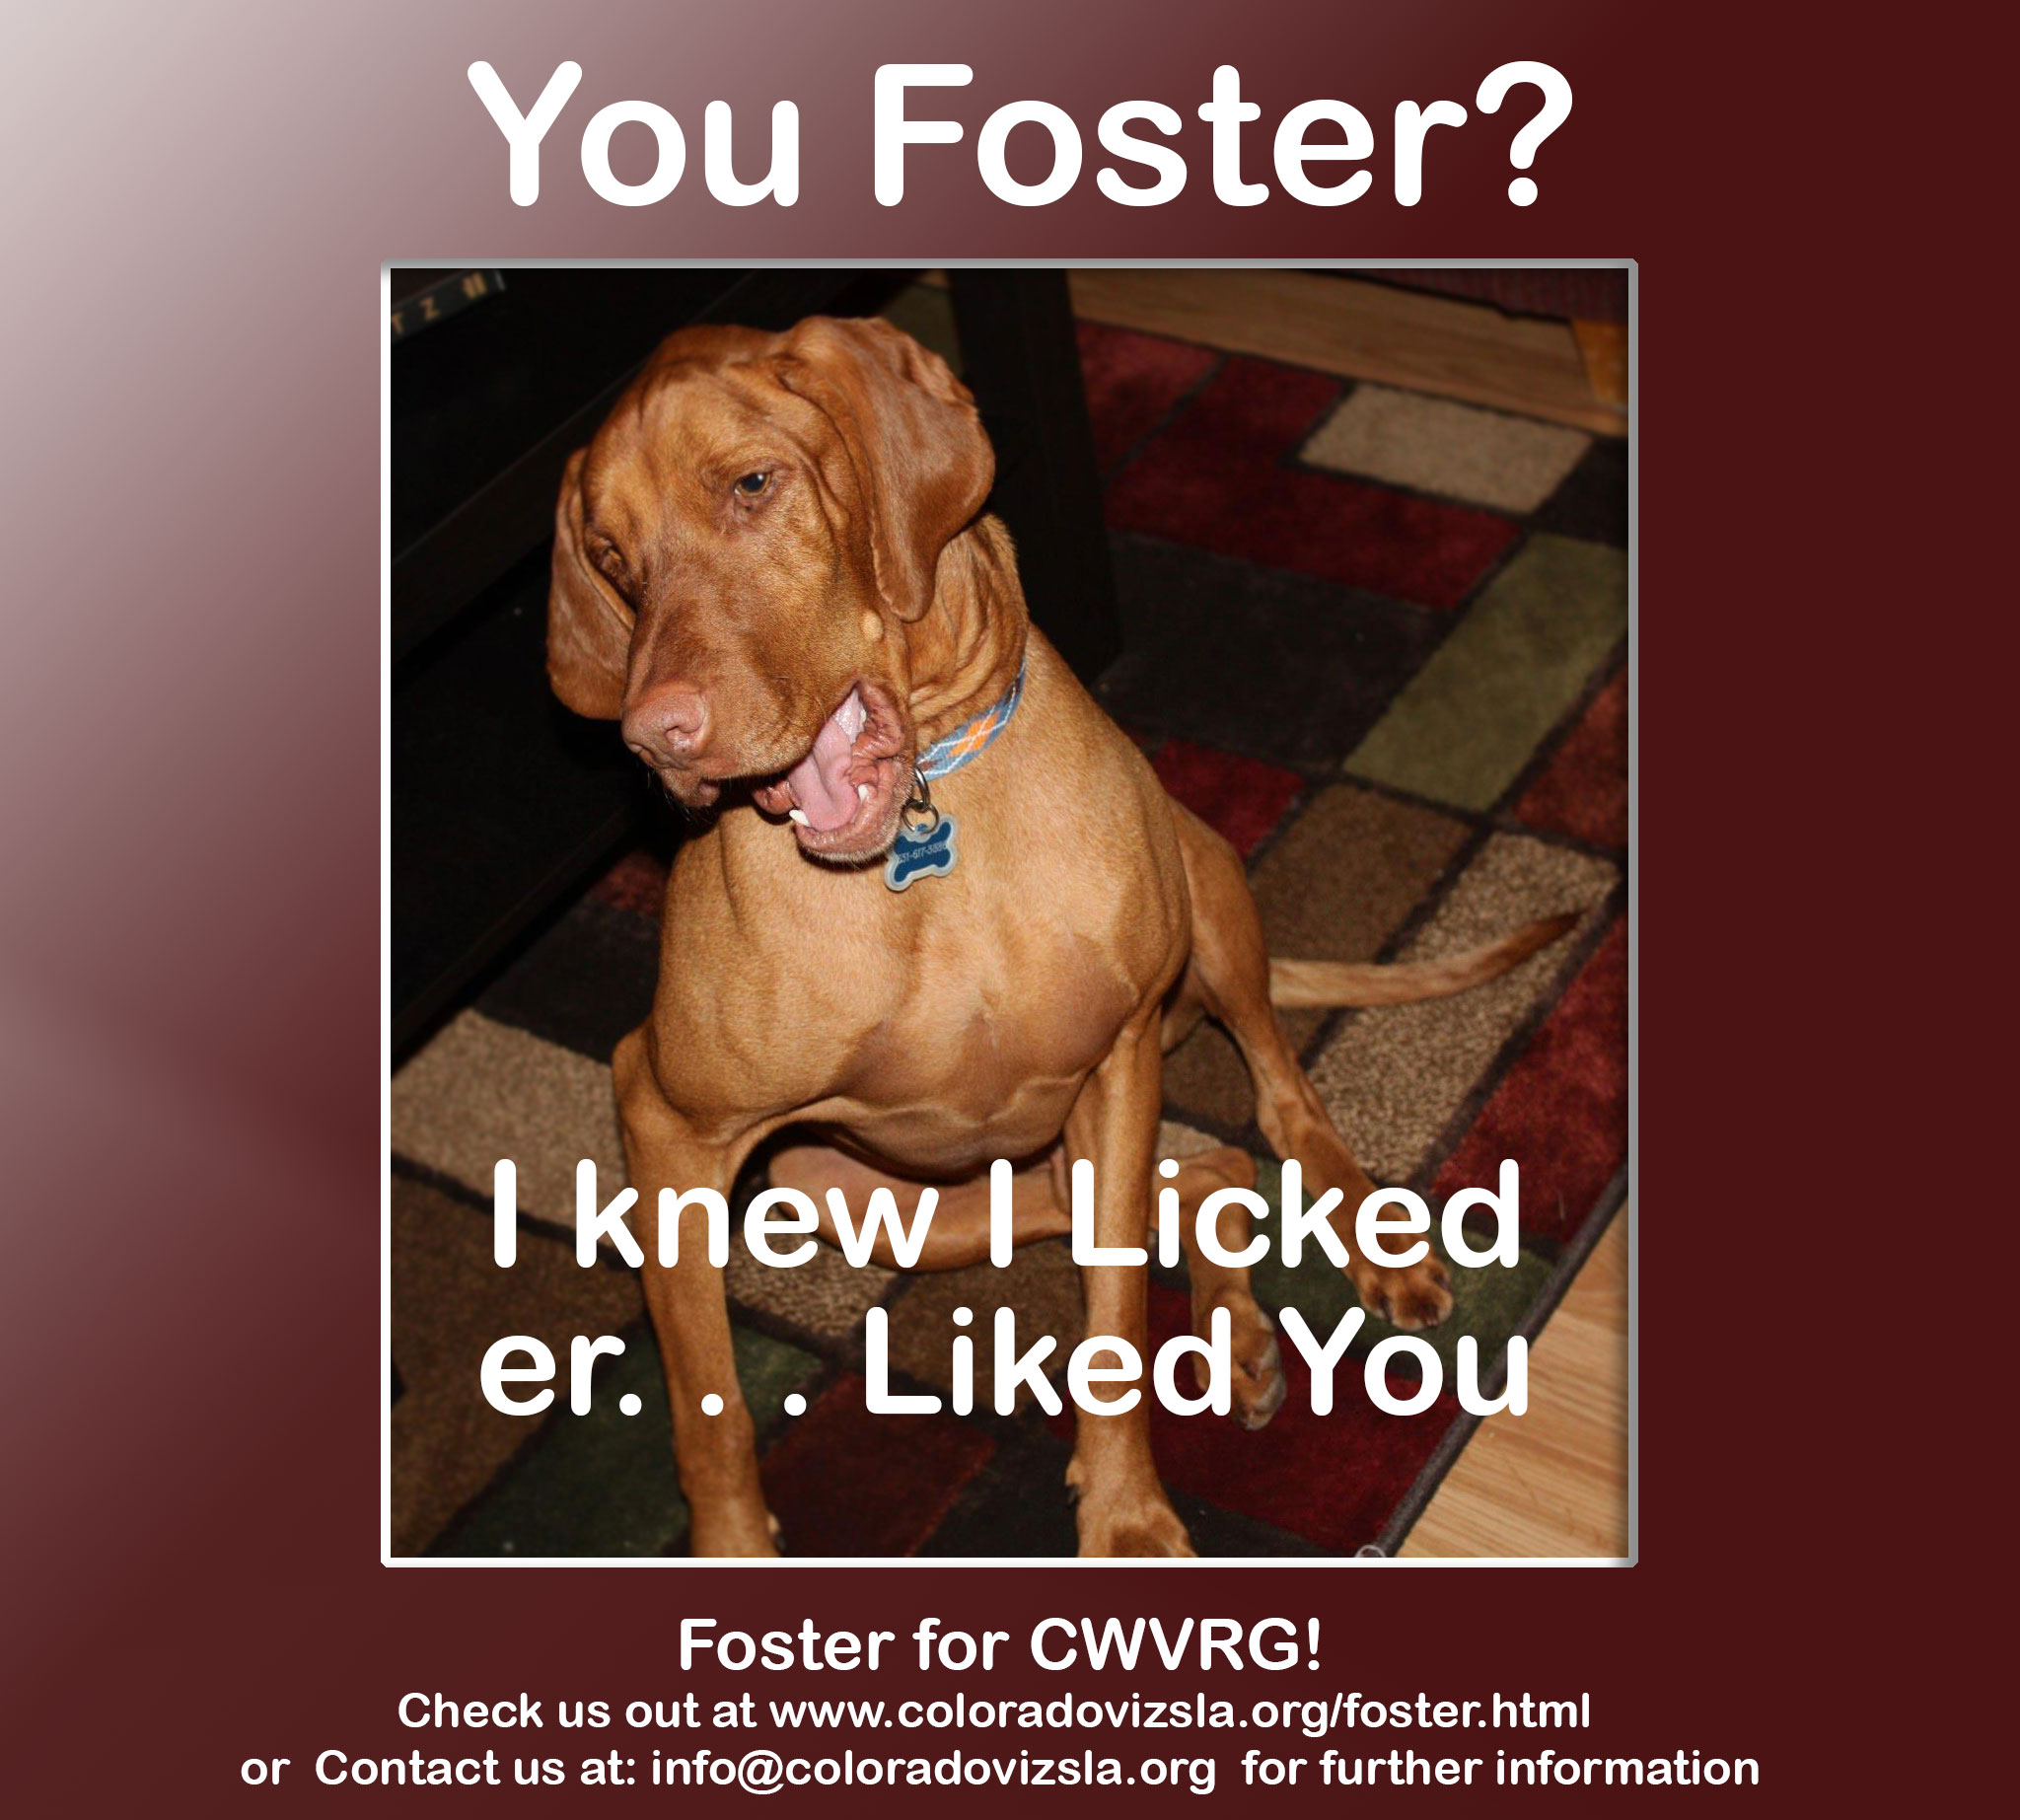 Your Foster? I know I licked er... Liked you!